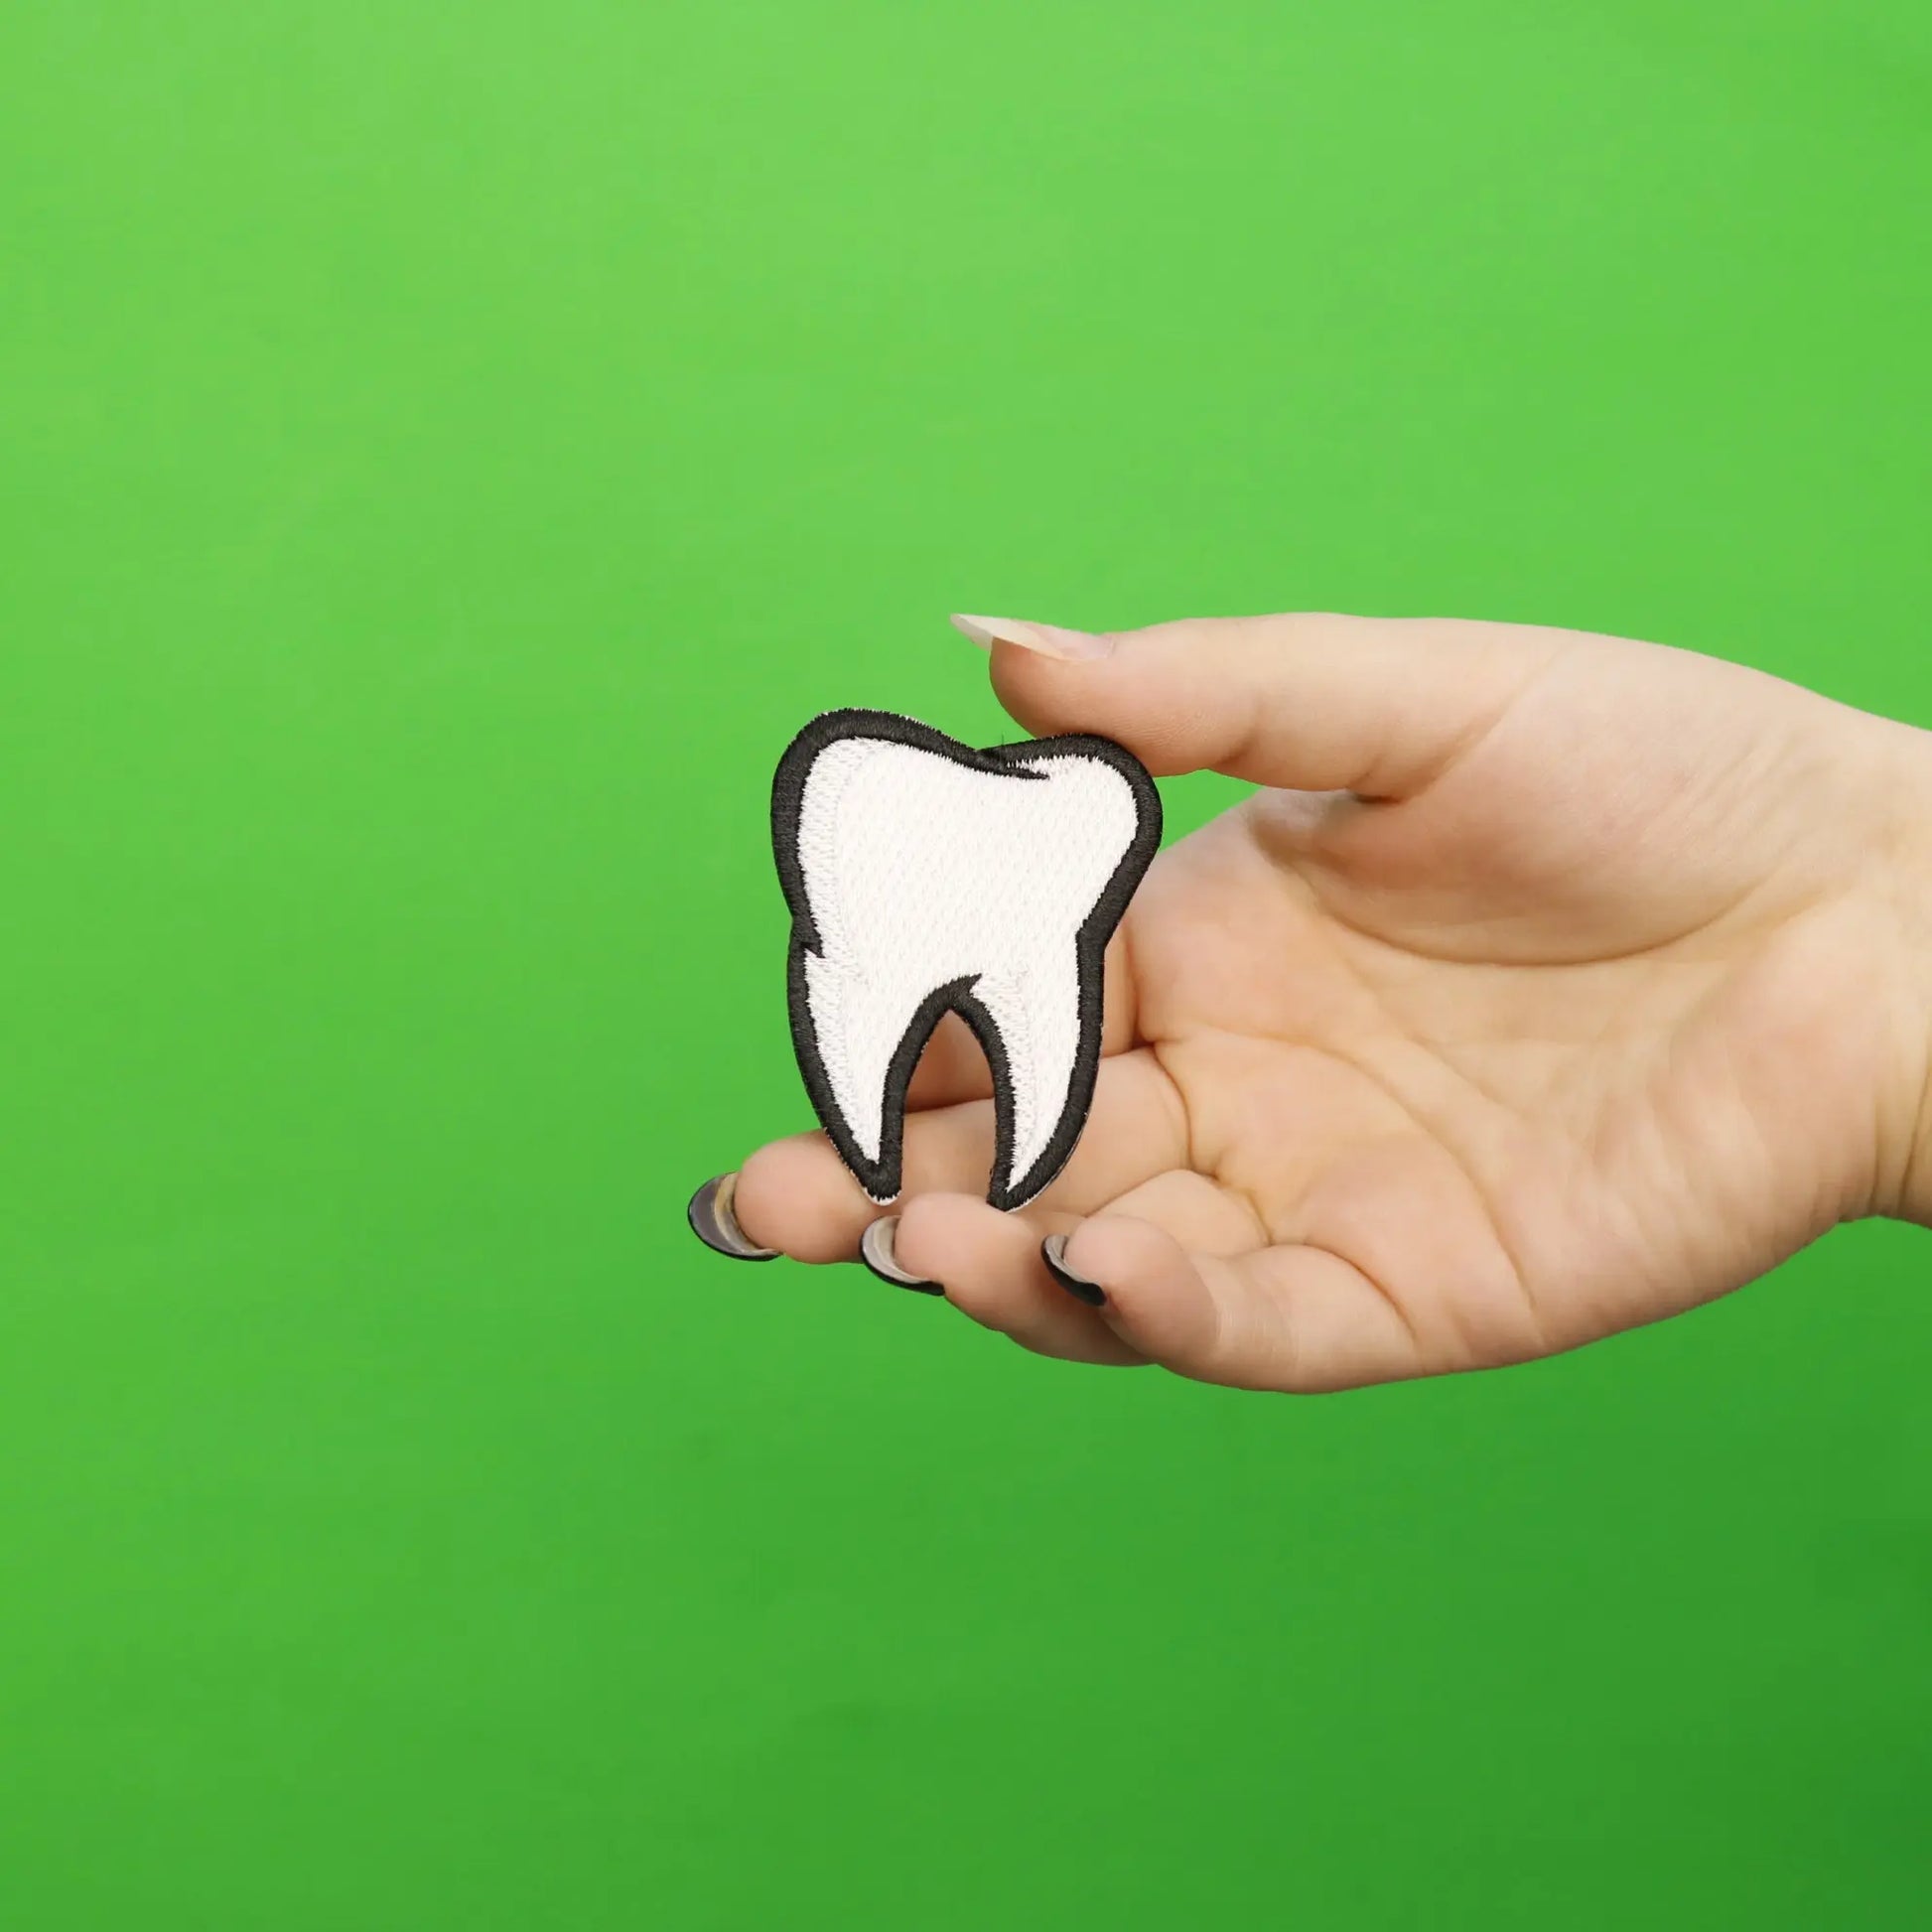 Tooth Emoji Embroidered Iron On Patch 